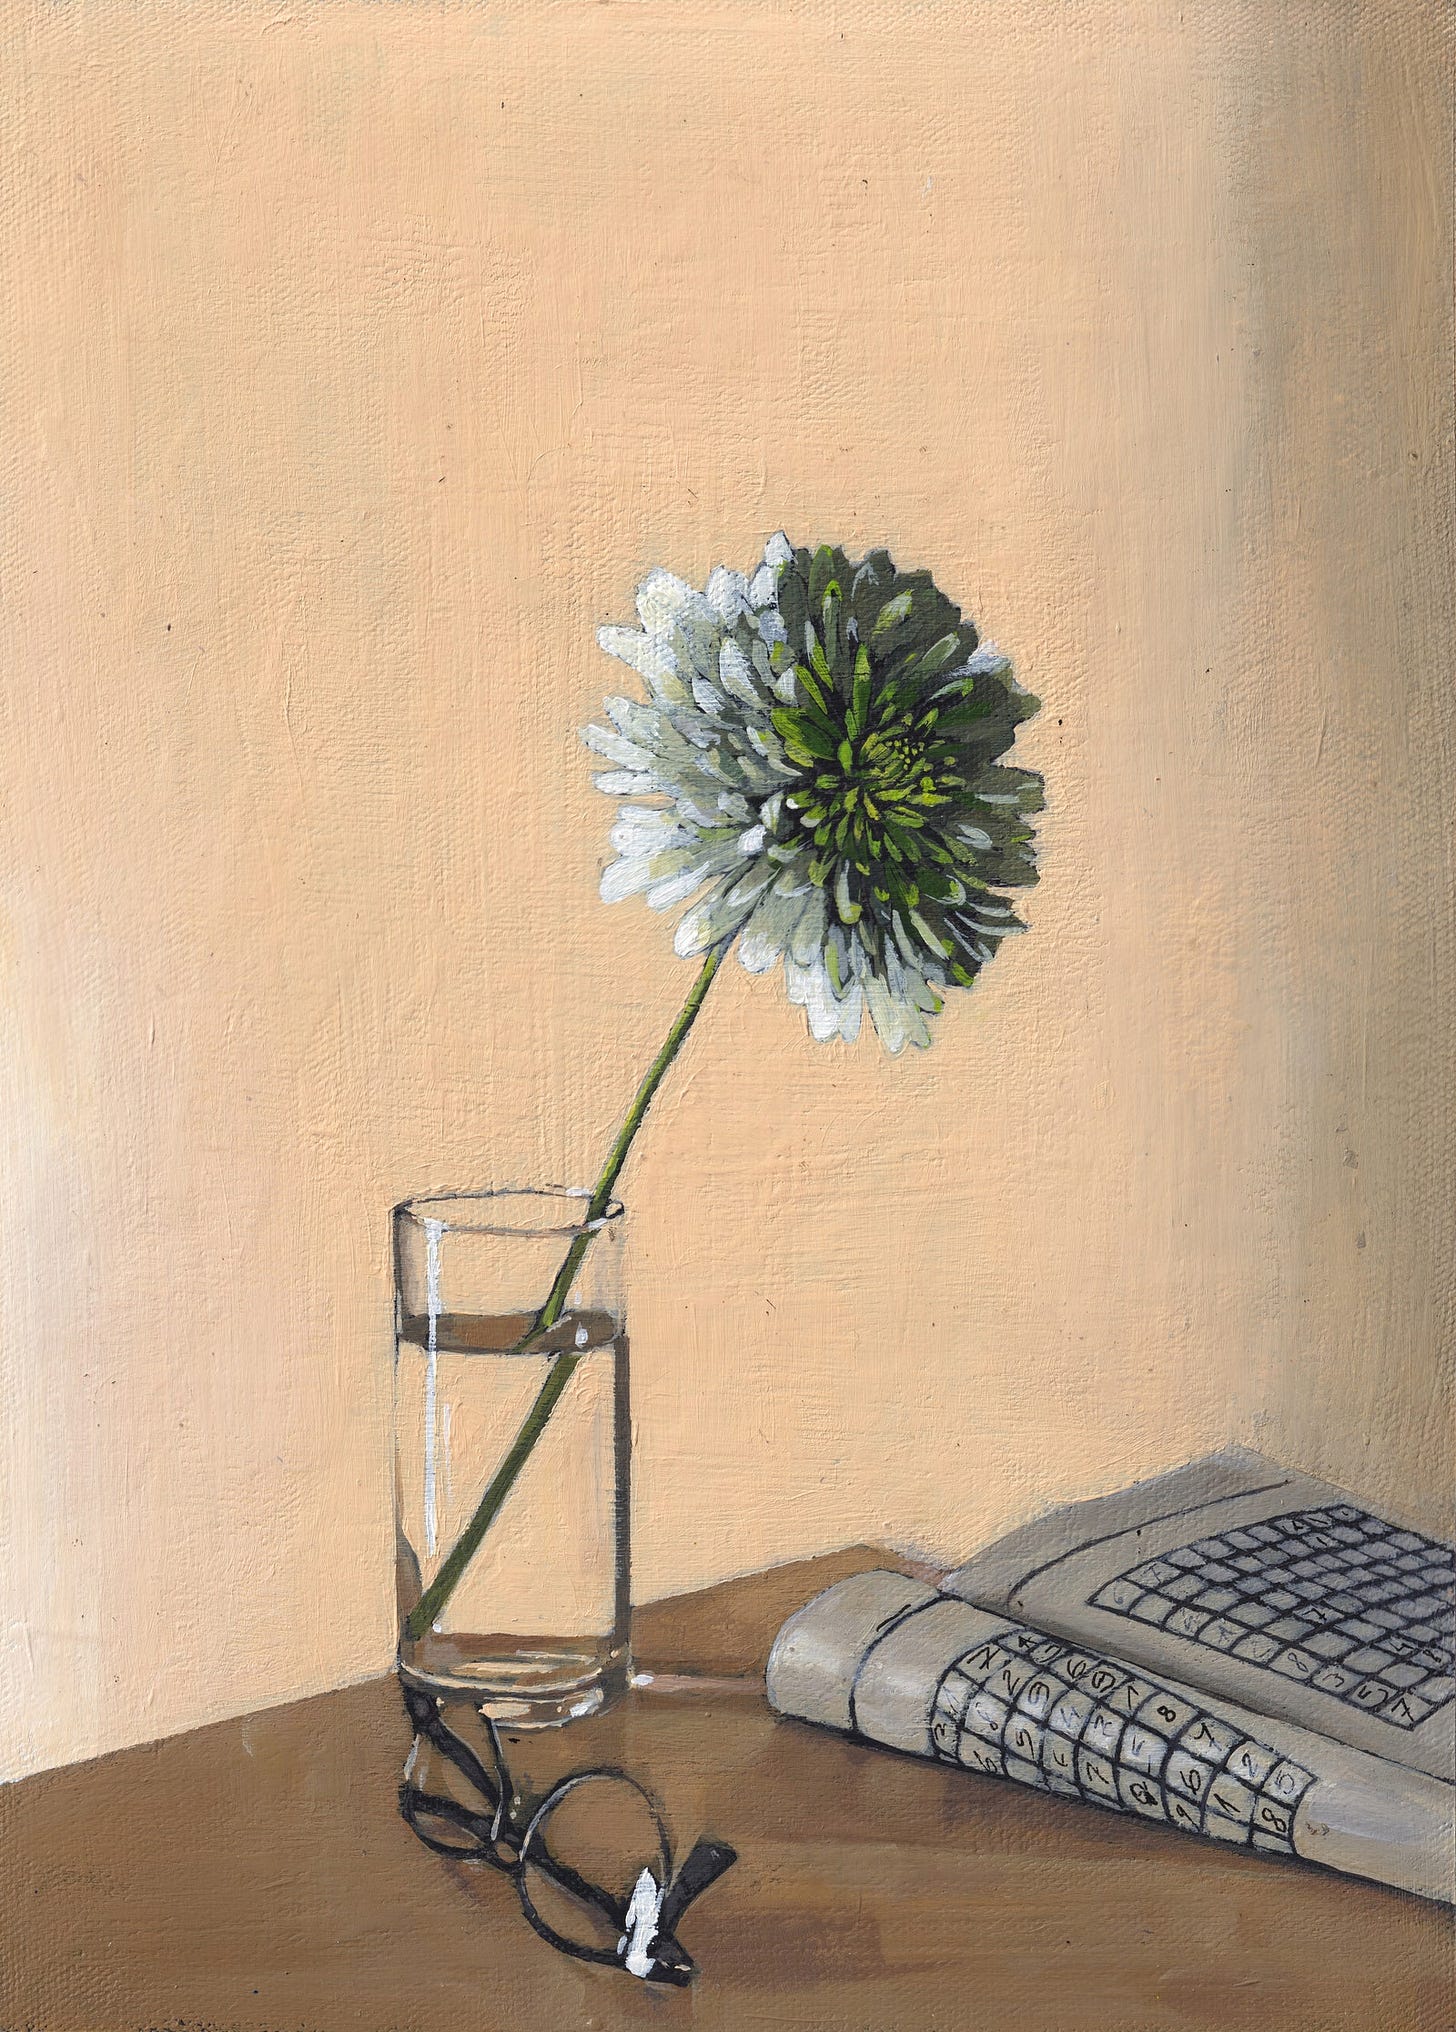 A chrysanthemum flower in a vase next to a sudoku book and glasses.